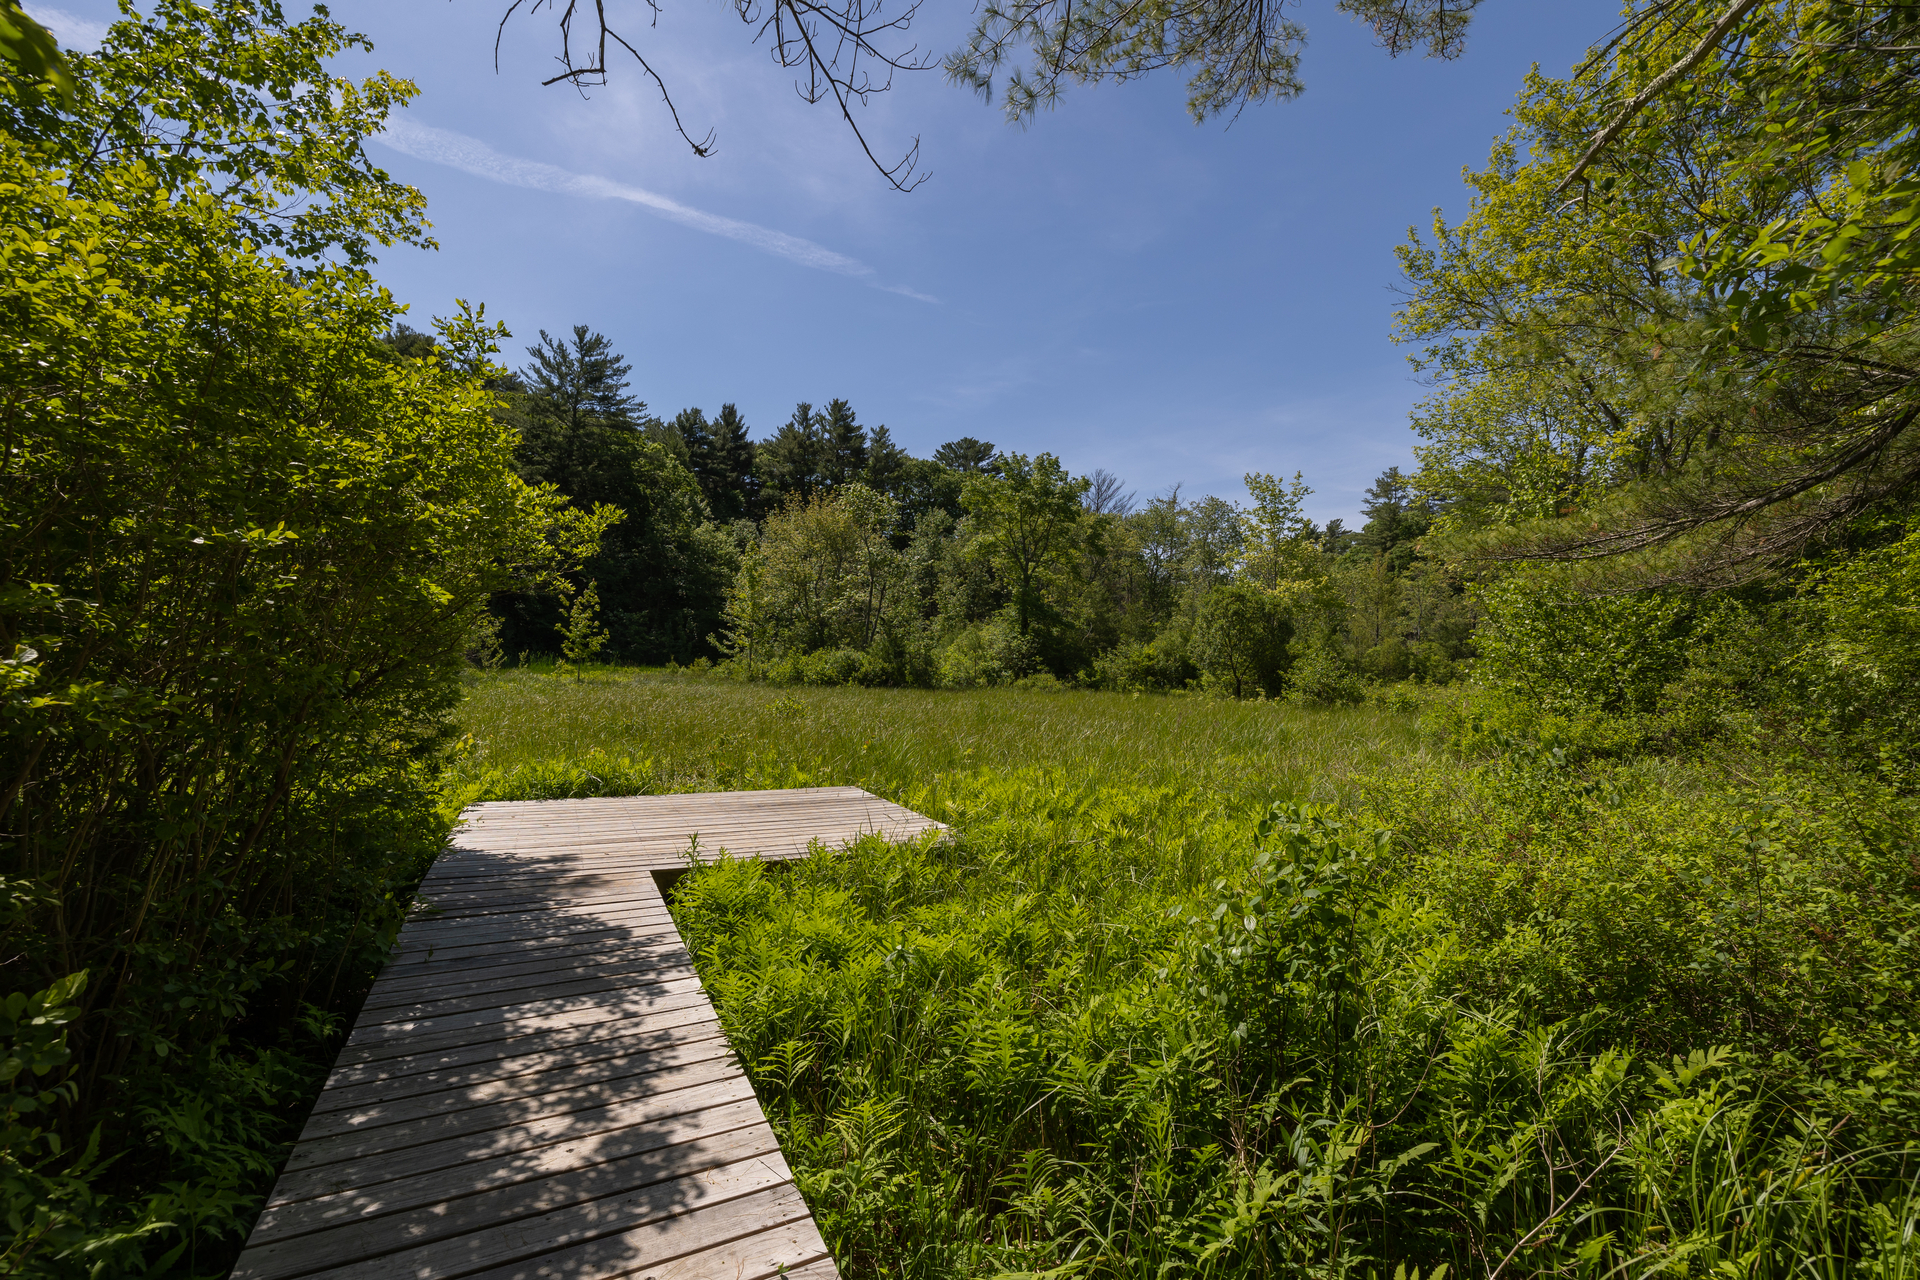 A boardwalk leading to an overlook across a green wetland. A forest is on the far side of the wetland.